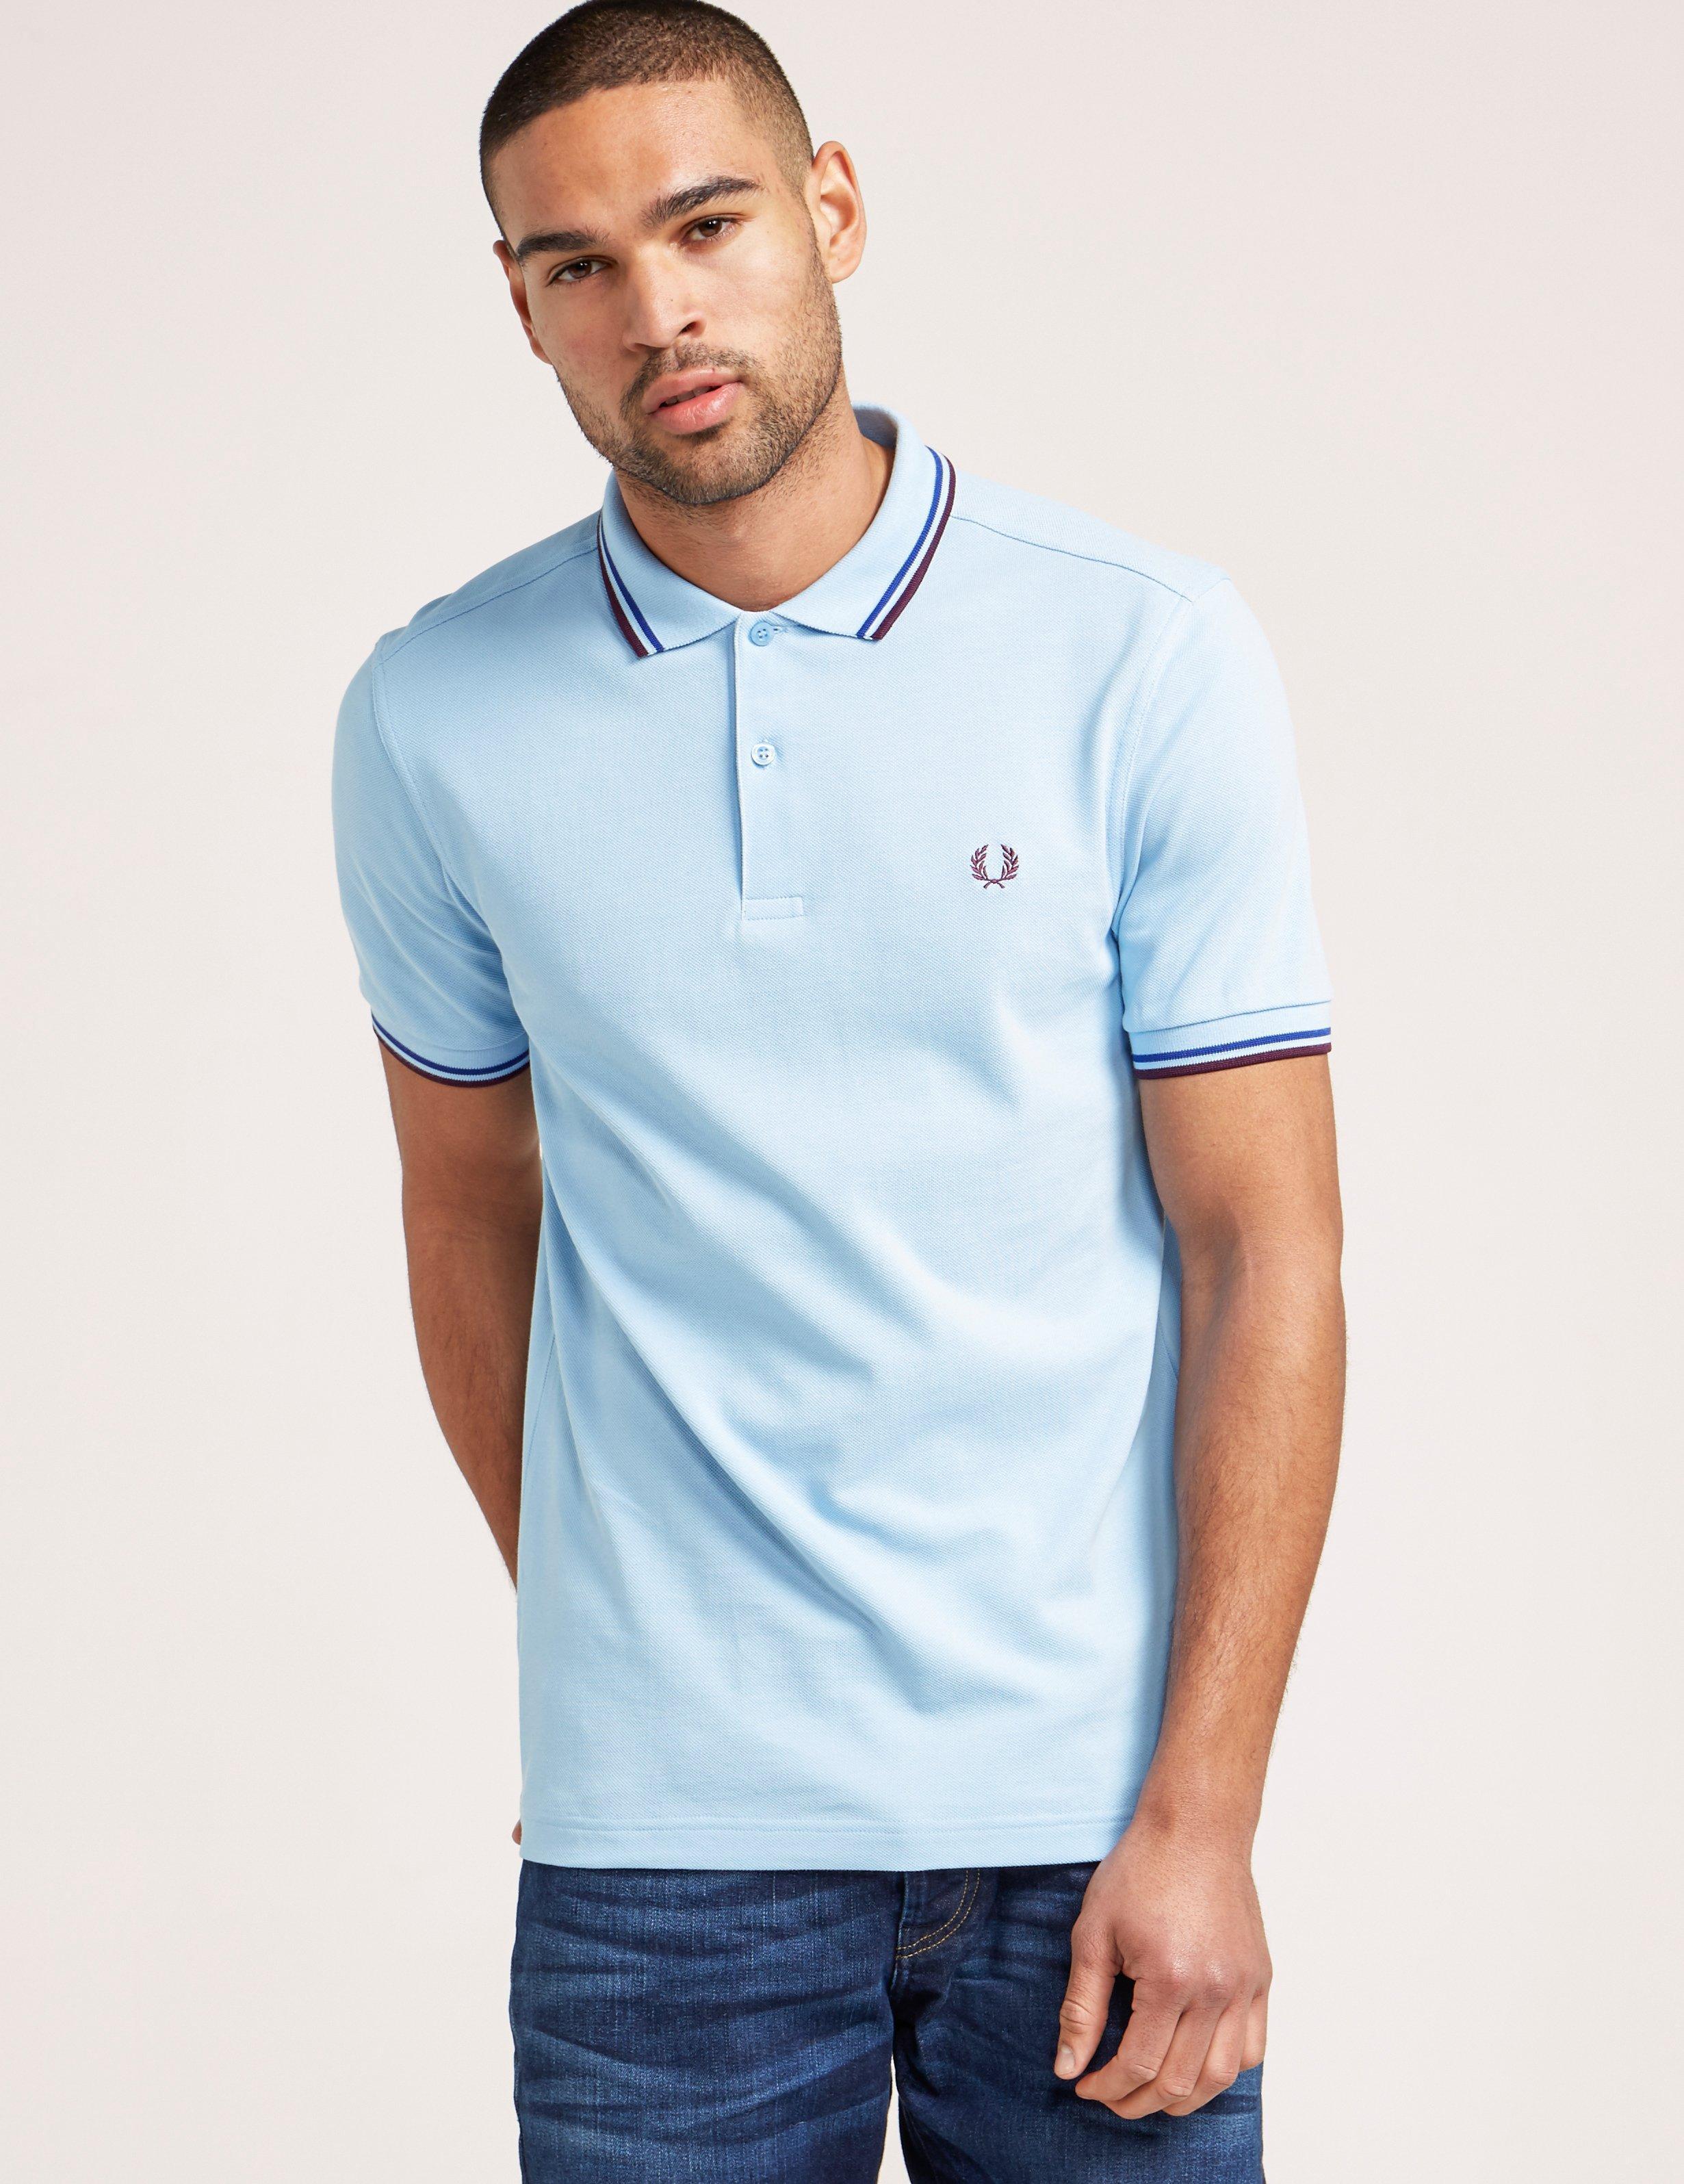 BNWT SALE RRP £65 FRED PERRY MEN'S TWIN TIPPED POLO SHIRT IN SKY BLUE/WHITE